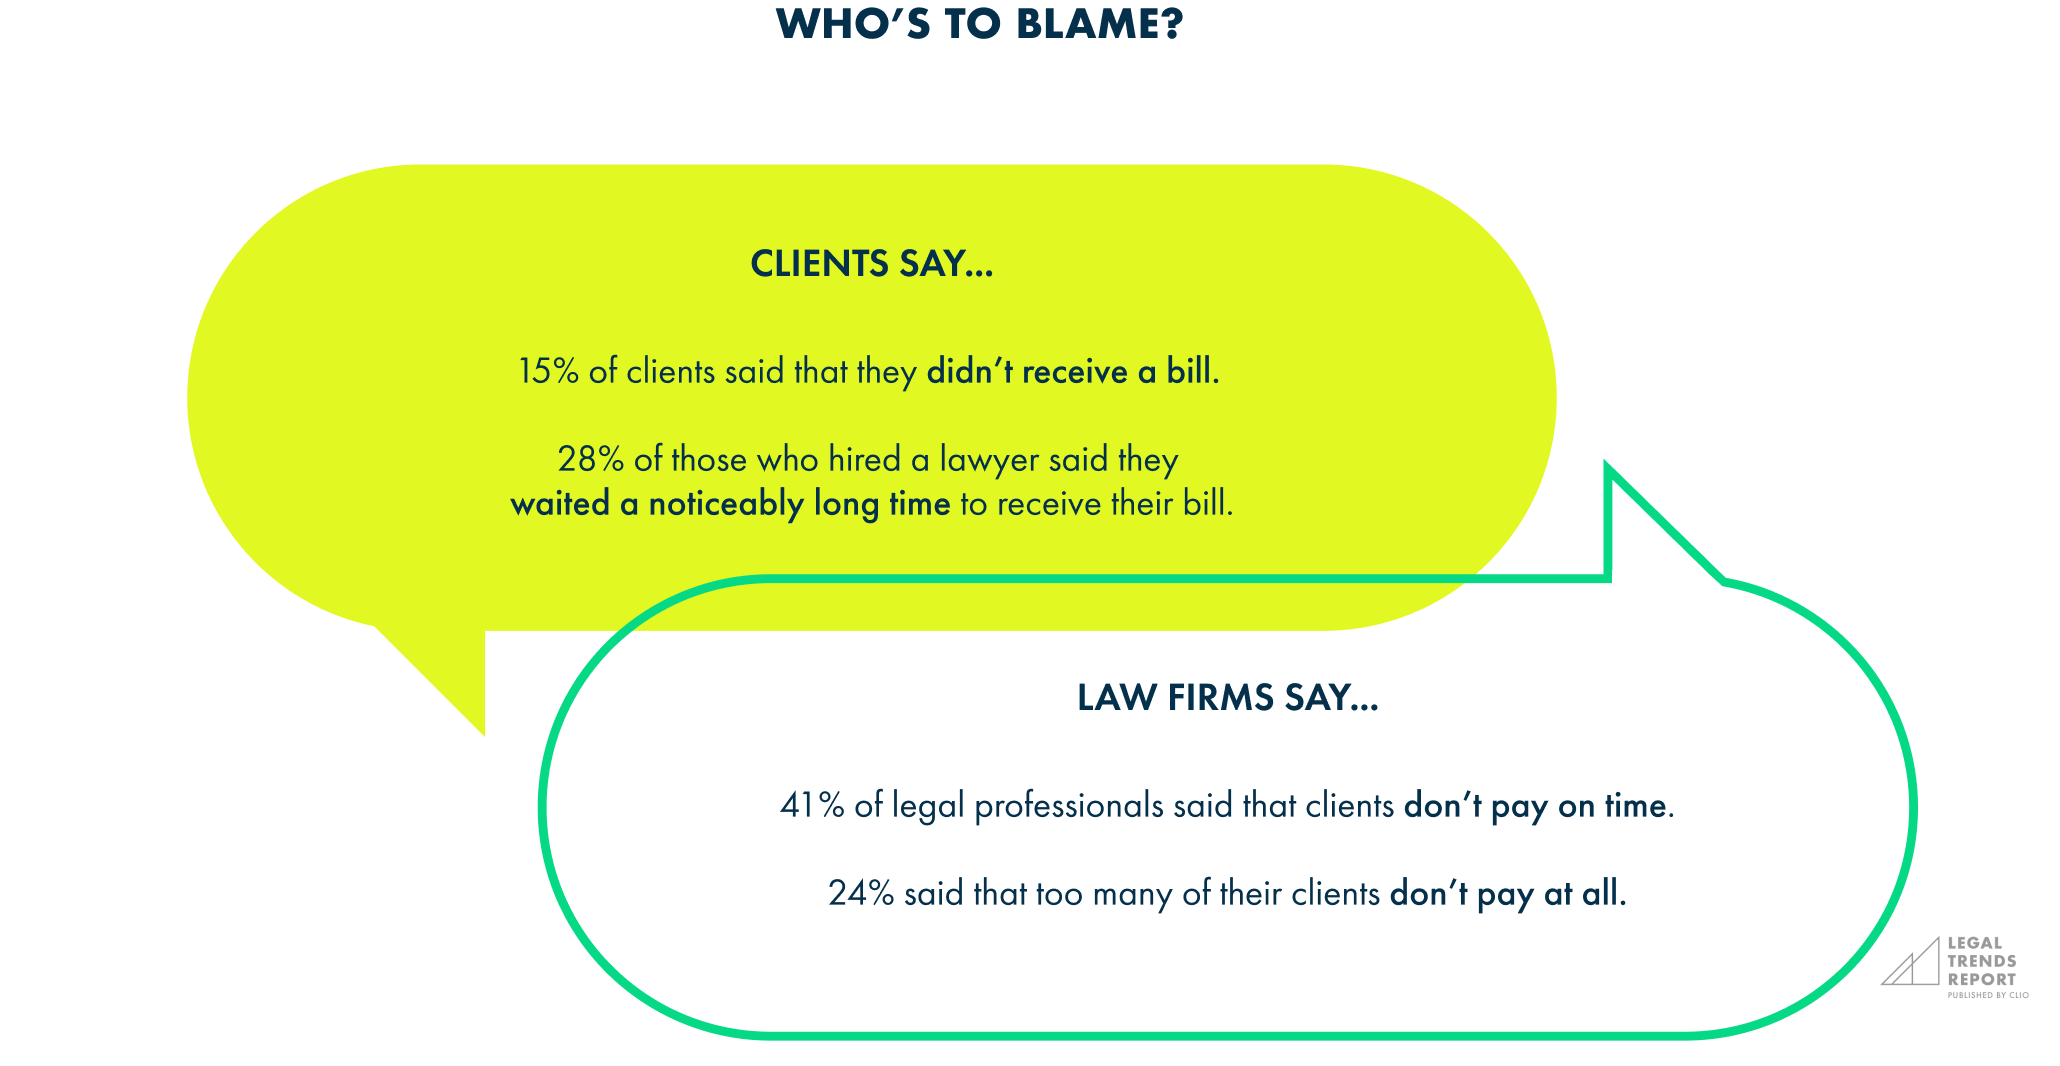 Who's to blame? Firms say, clients say